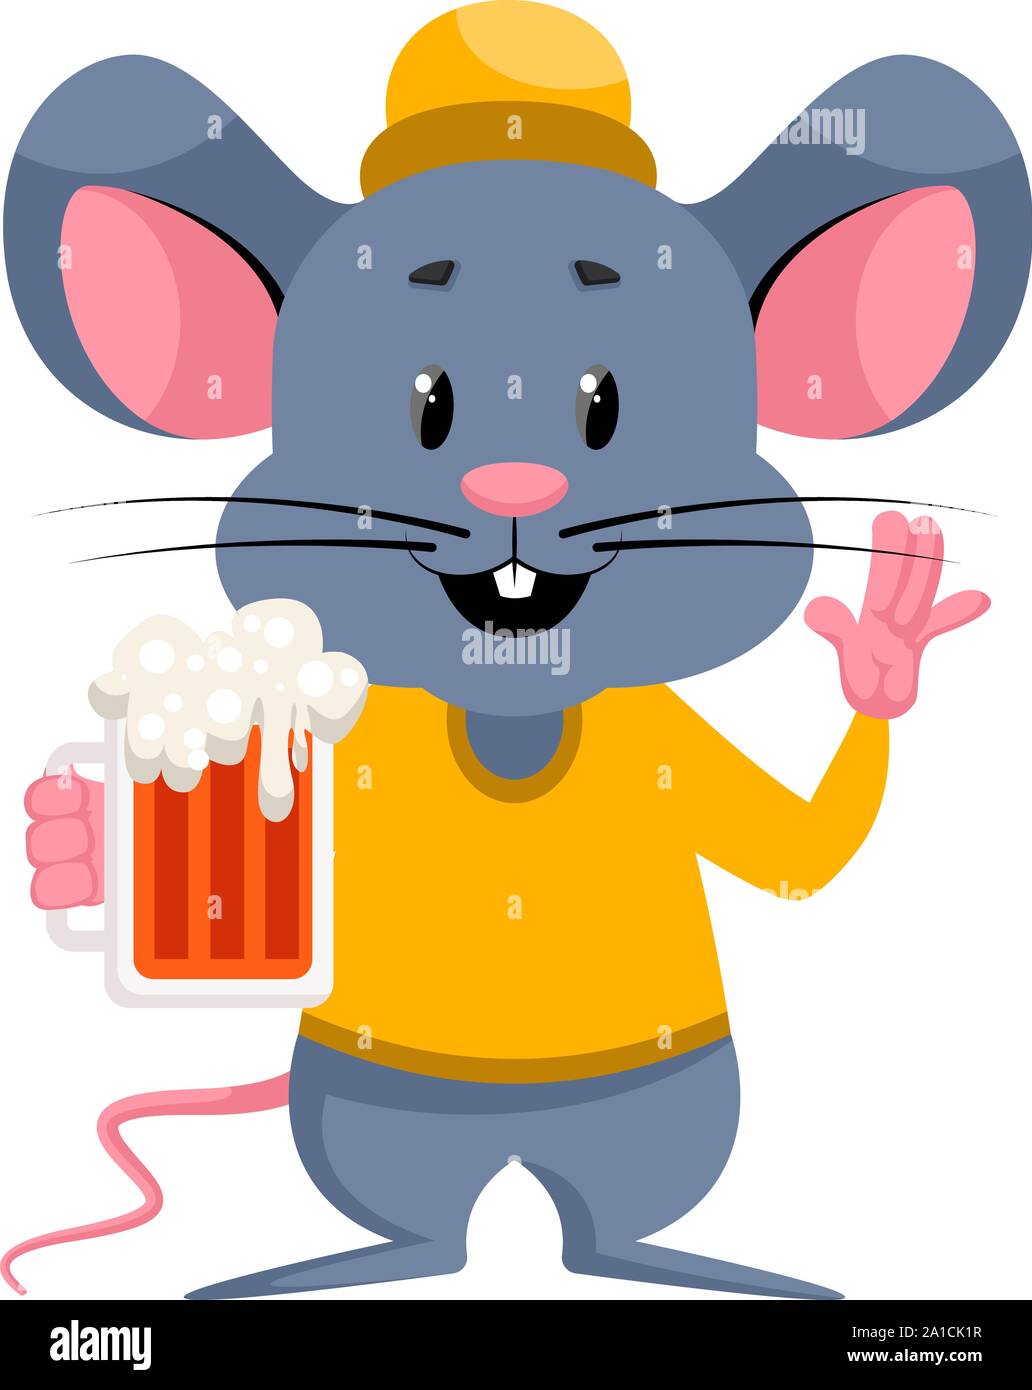 Mouse with beer, illustration, vector on white background. Stock Vector